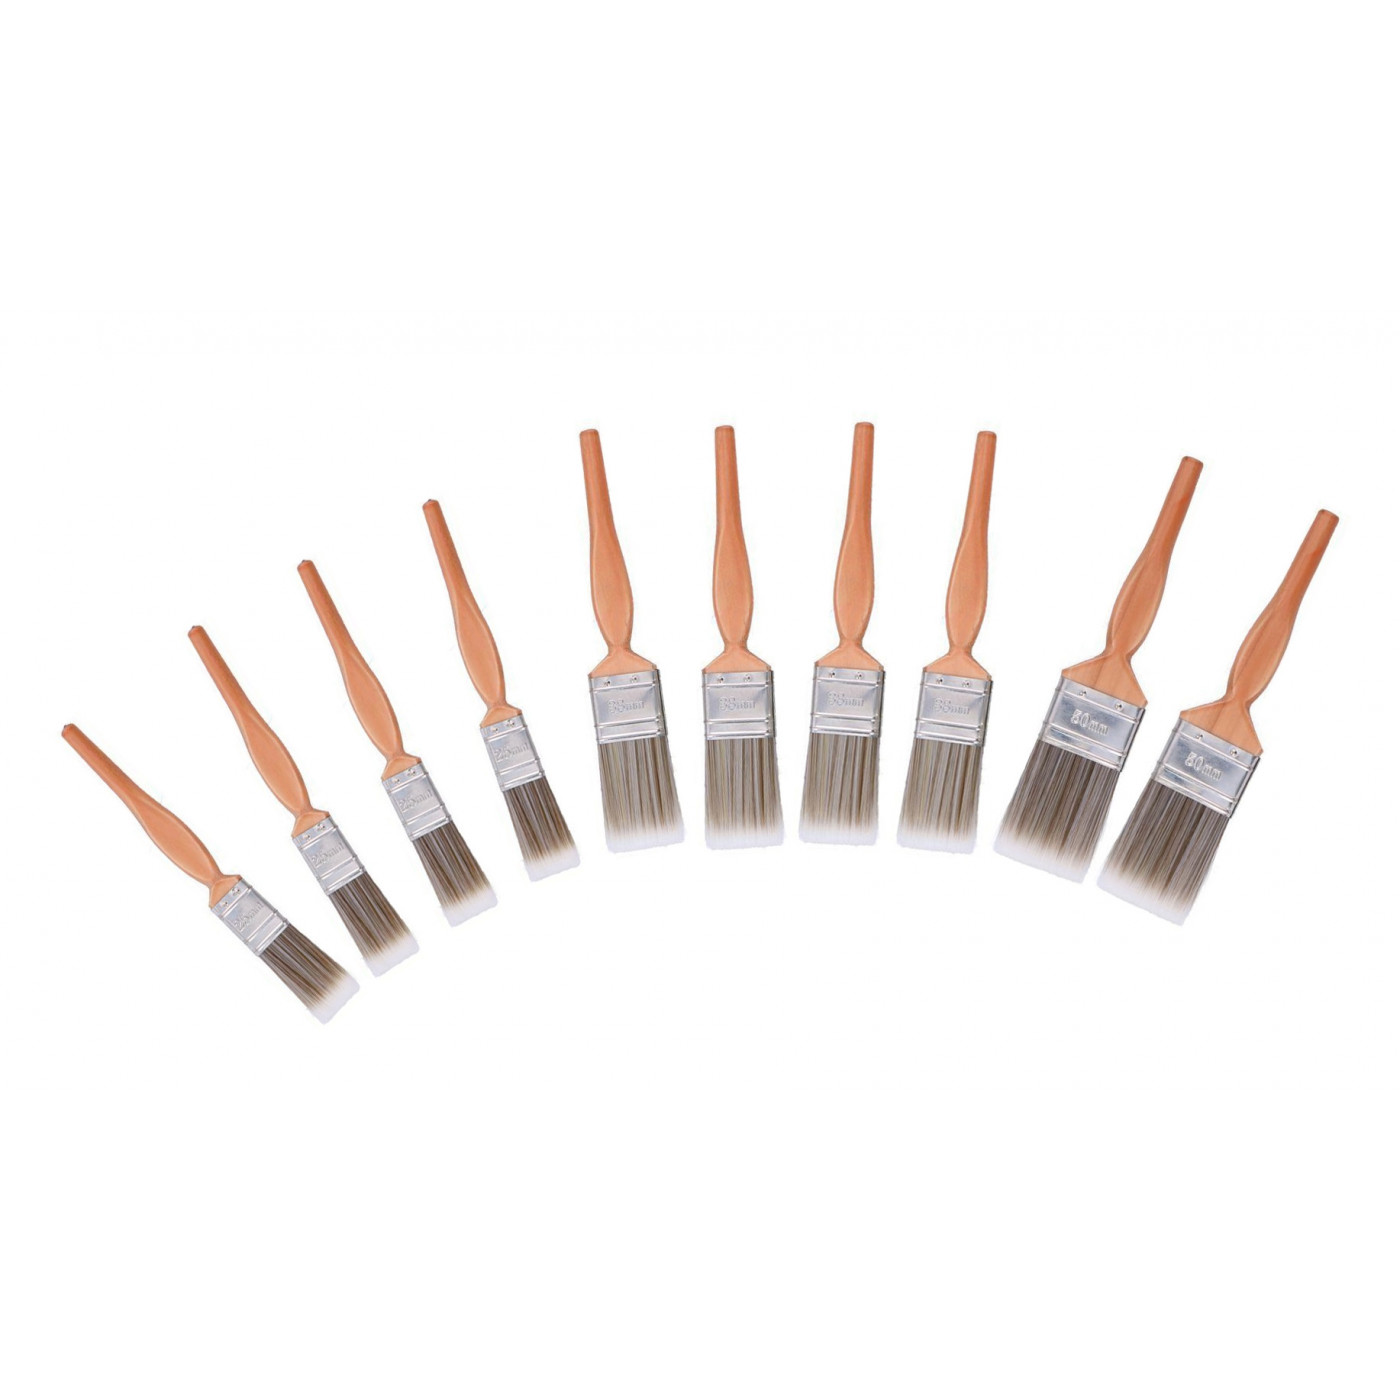 Set of 10 paint brushes (wooden handle)